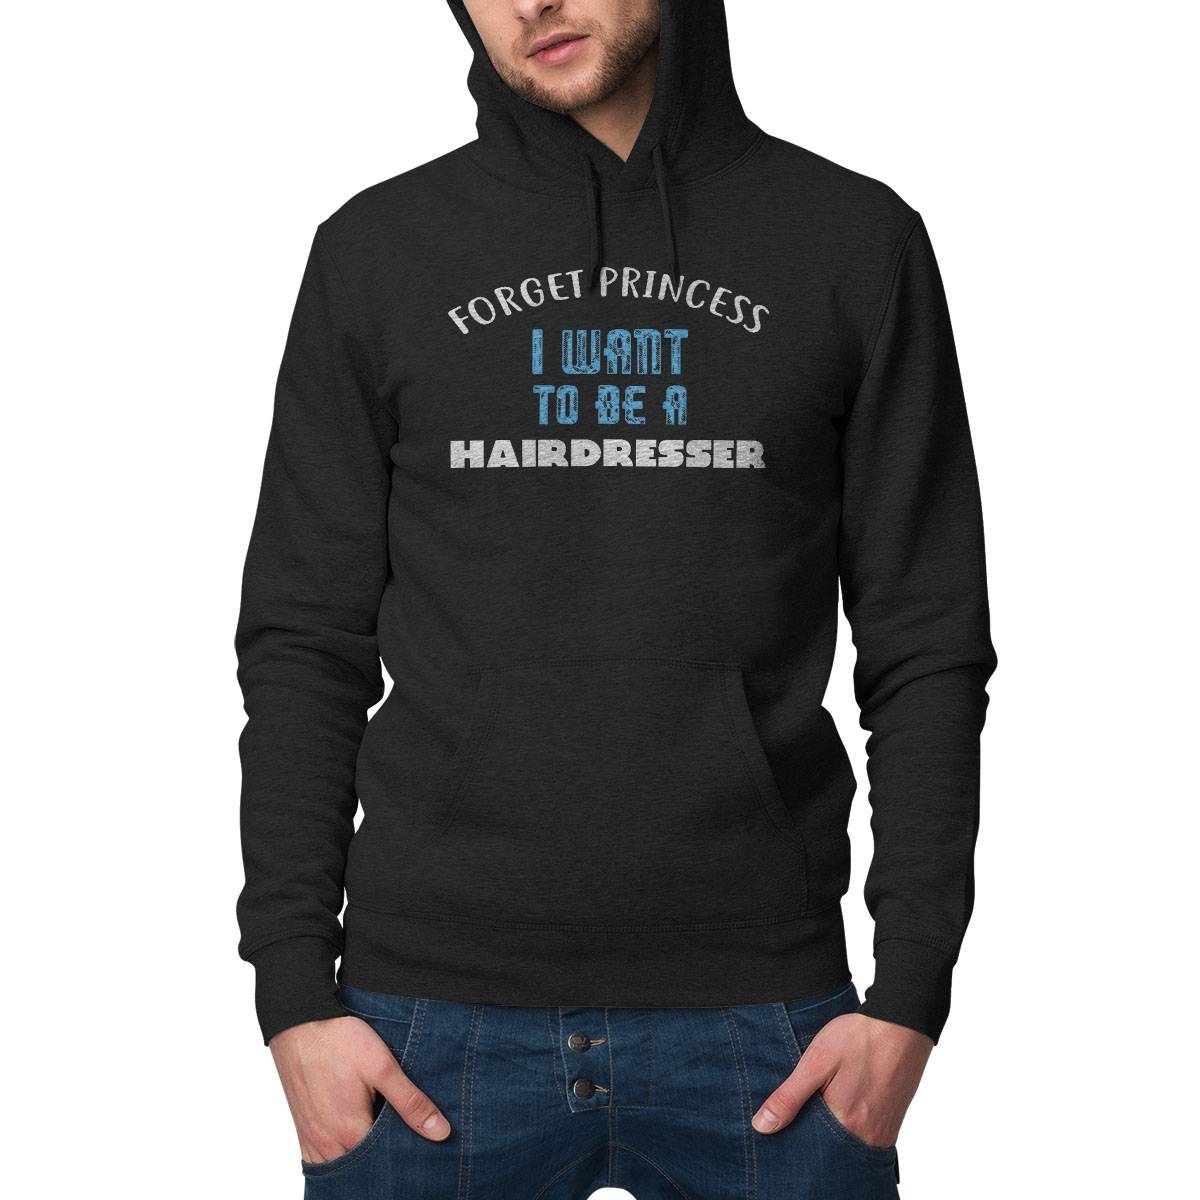 Forget Princess I Want To Be A Hairdresser T-Shirt